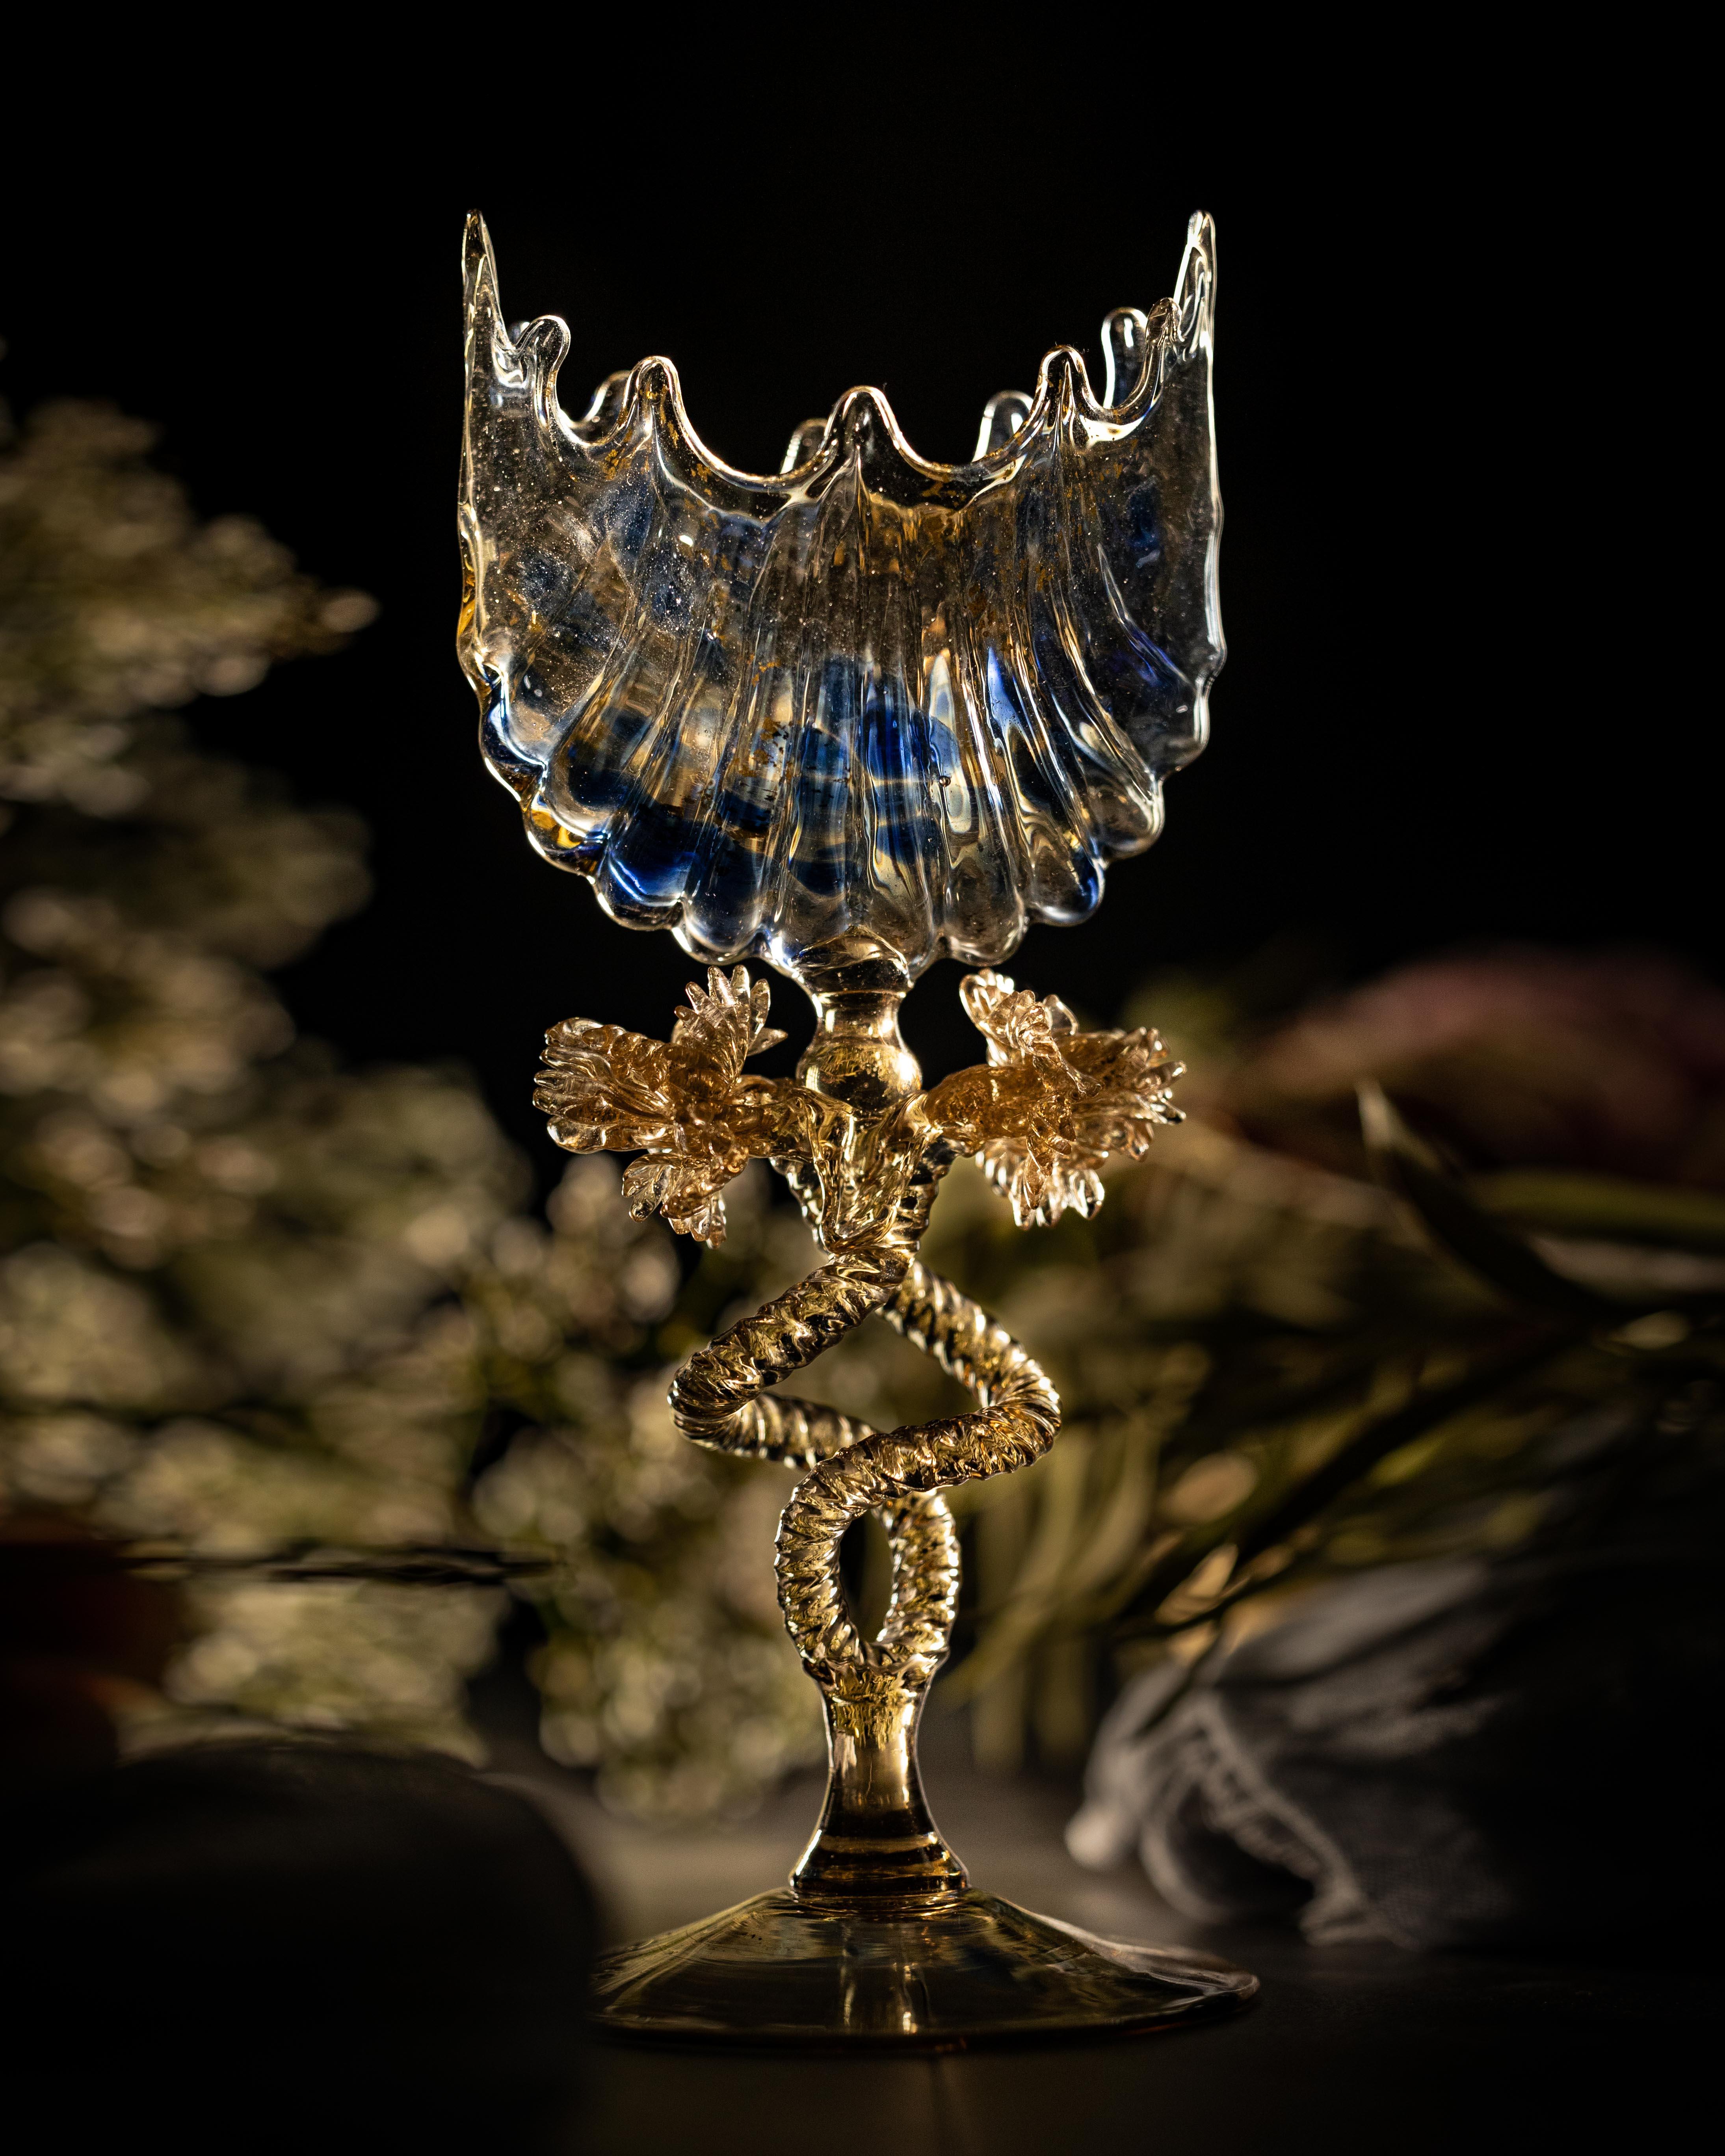 A Venetian Murano glass goblet made by glass masters Salviati & Co in the late 19th century.

During the late 19th century, the Italian Risorgimento consolidated the peninsula’s disparate city states and formed the country of Italy that we know